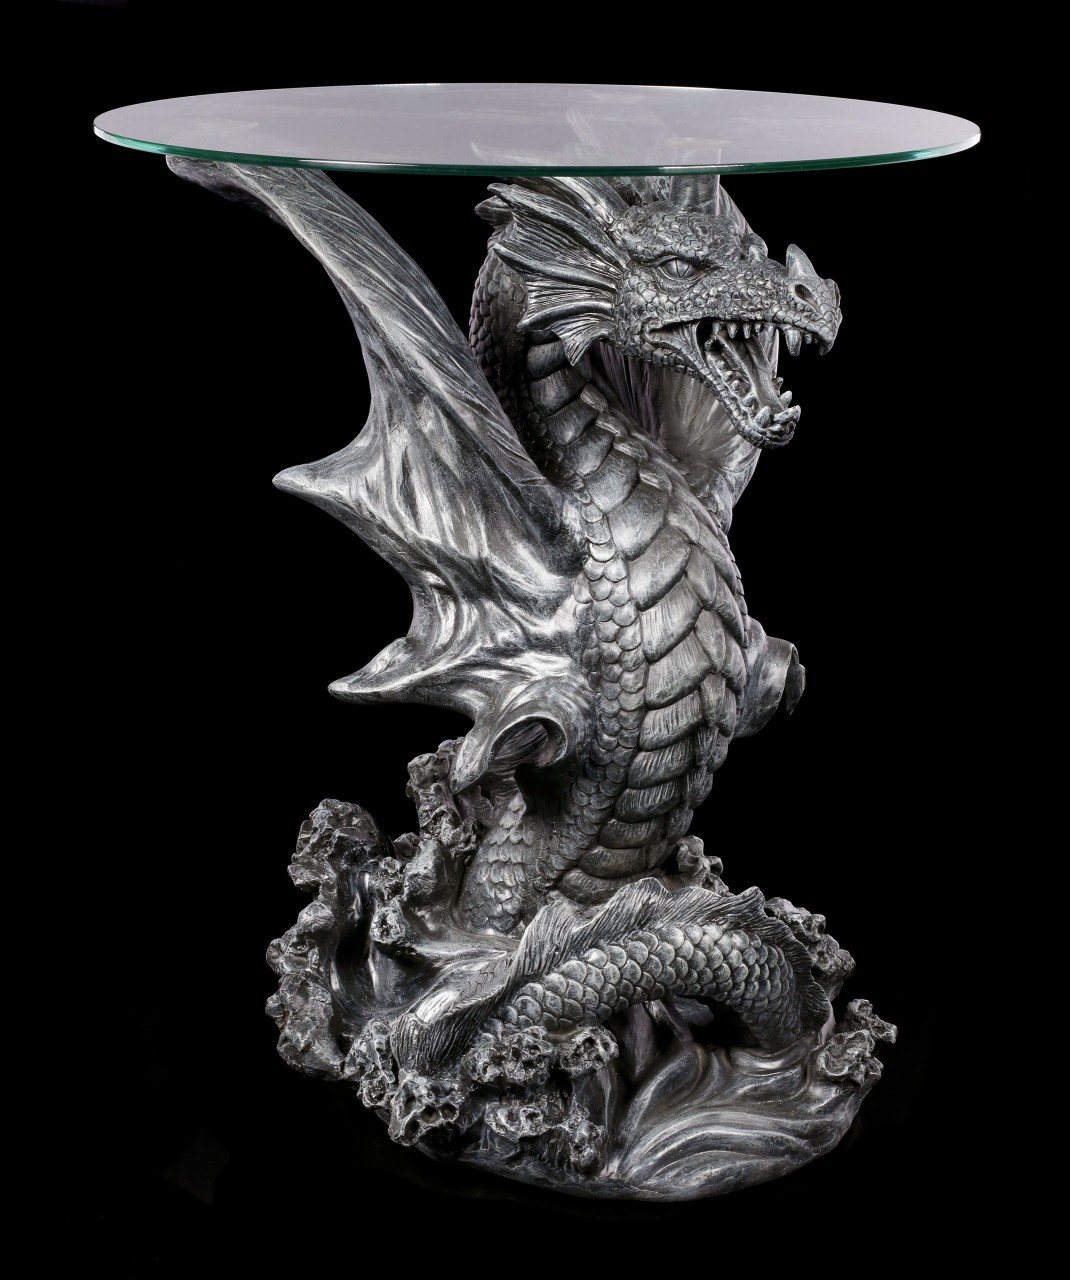 Dragon Table with Glass Plate - Water Dragon